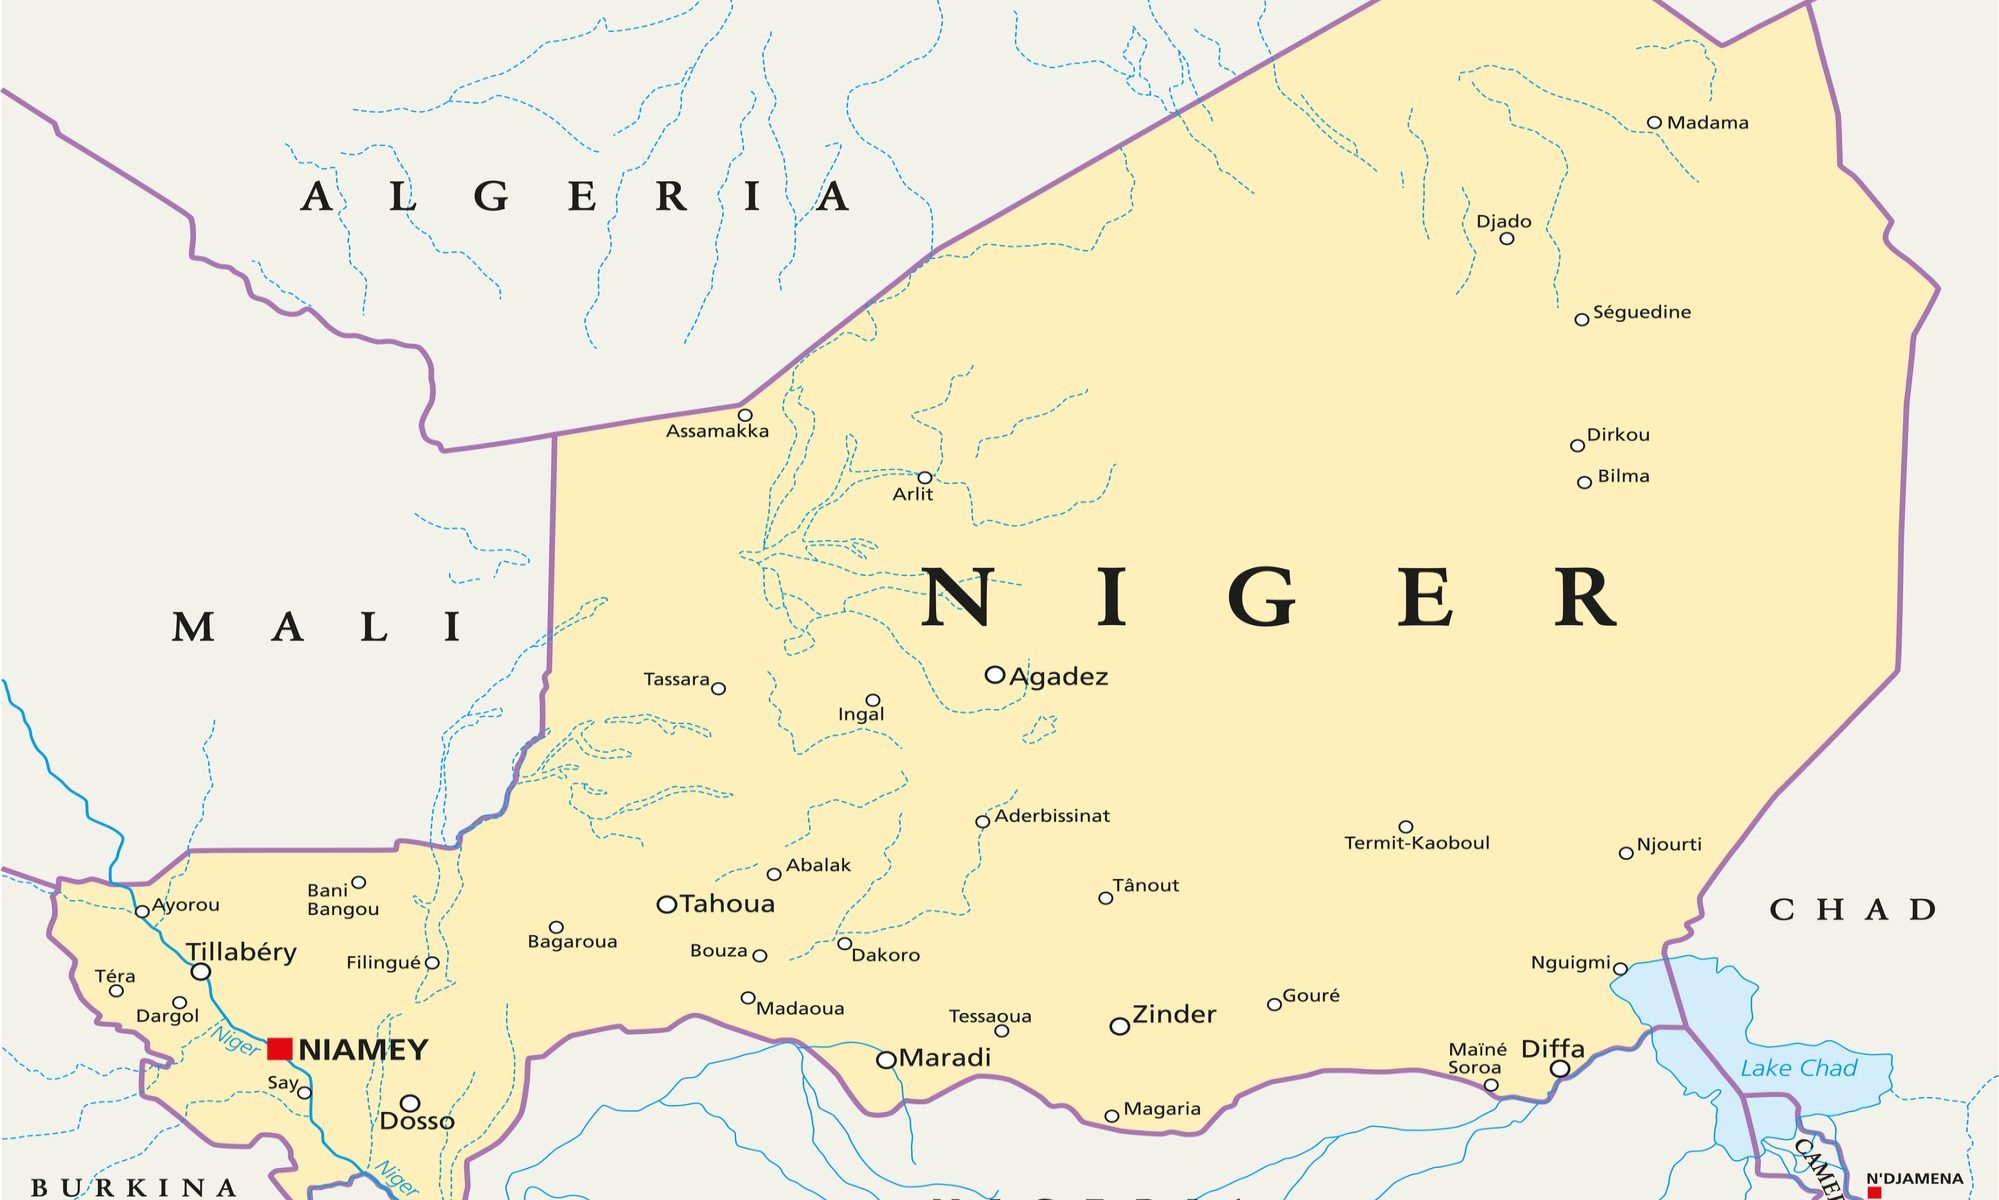 Map of Niger and adjacent countries